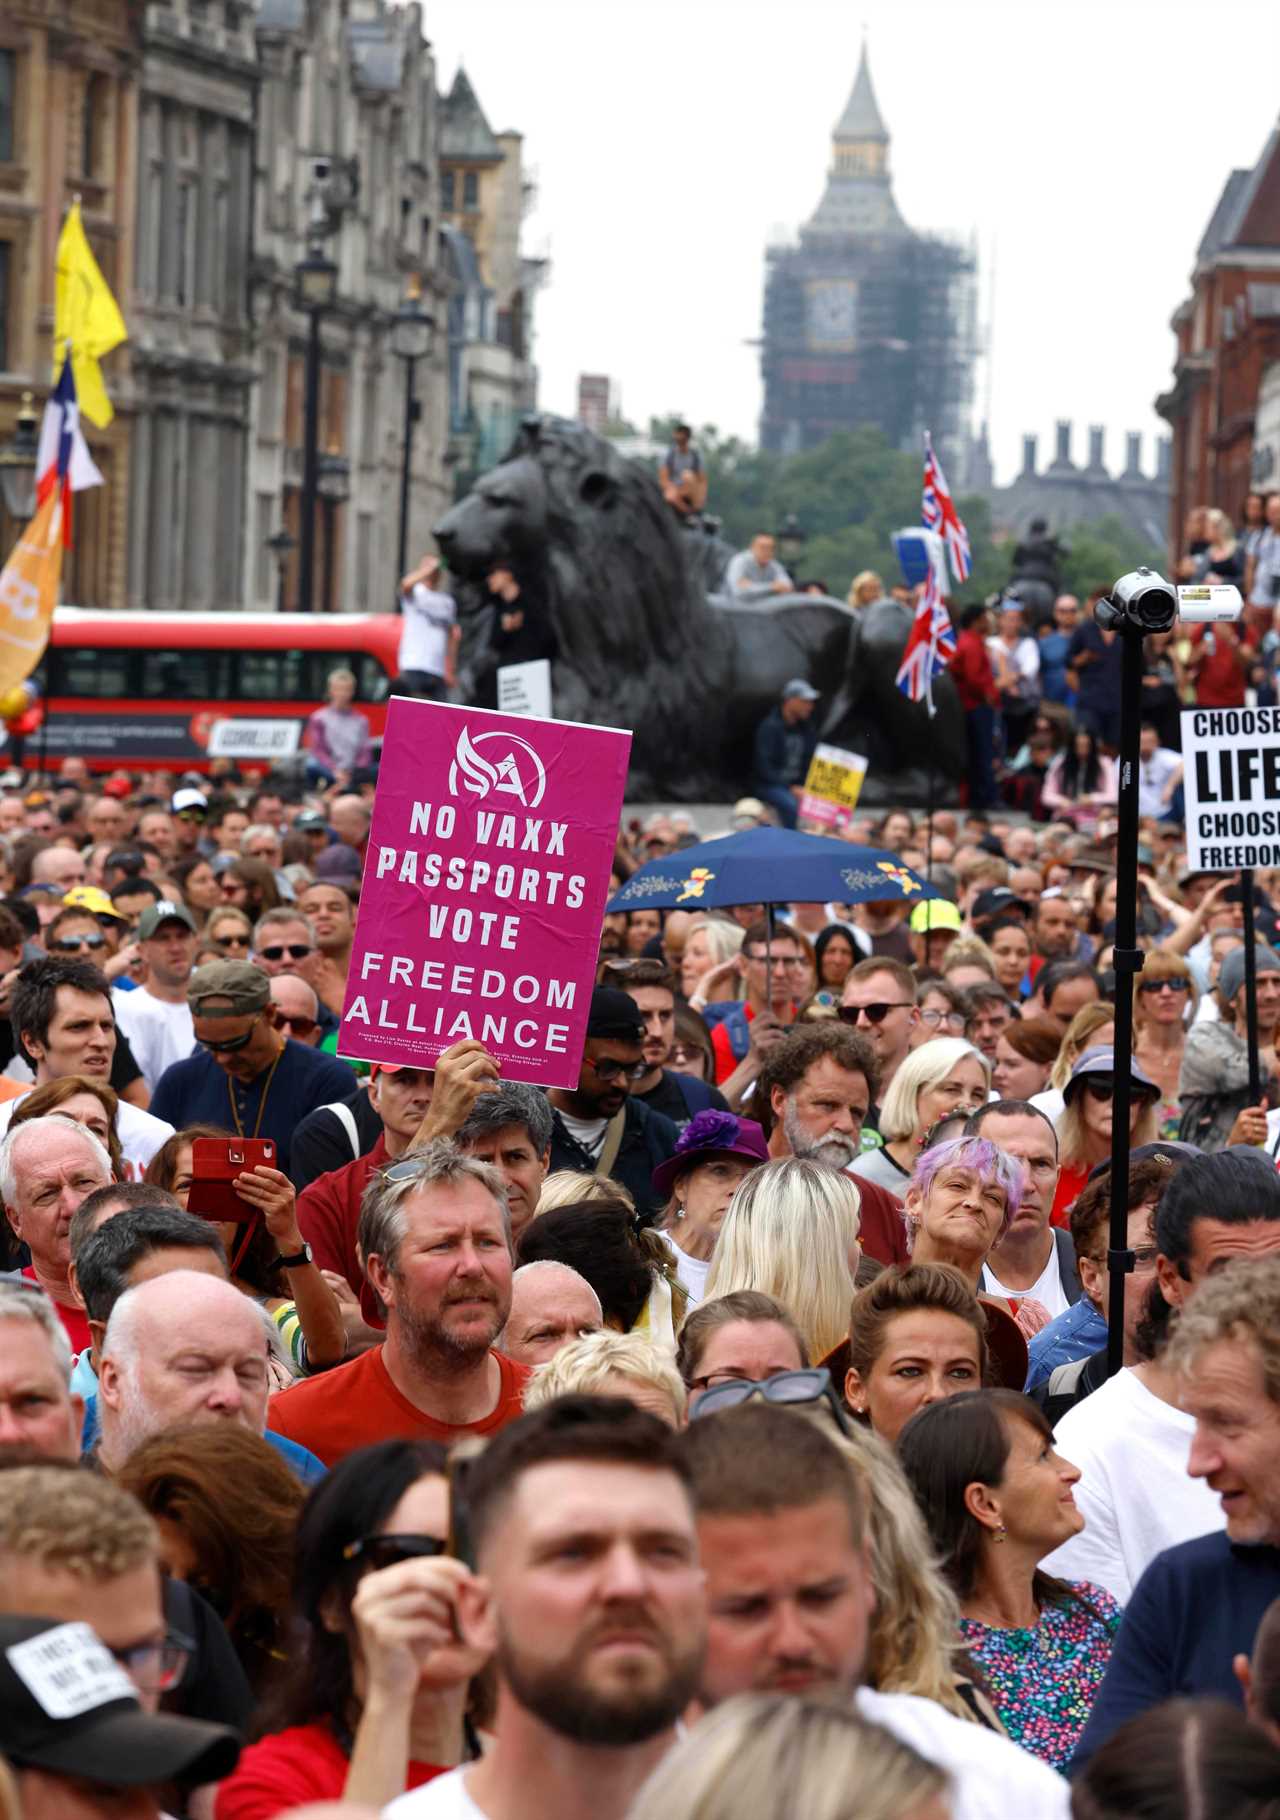 Thousands of anti-vax protesters descend on central London for demo